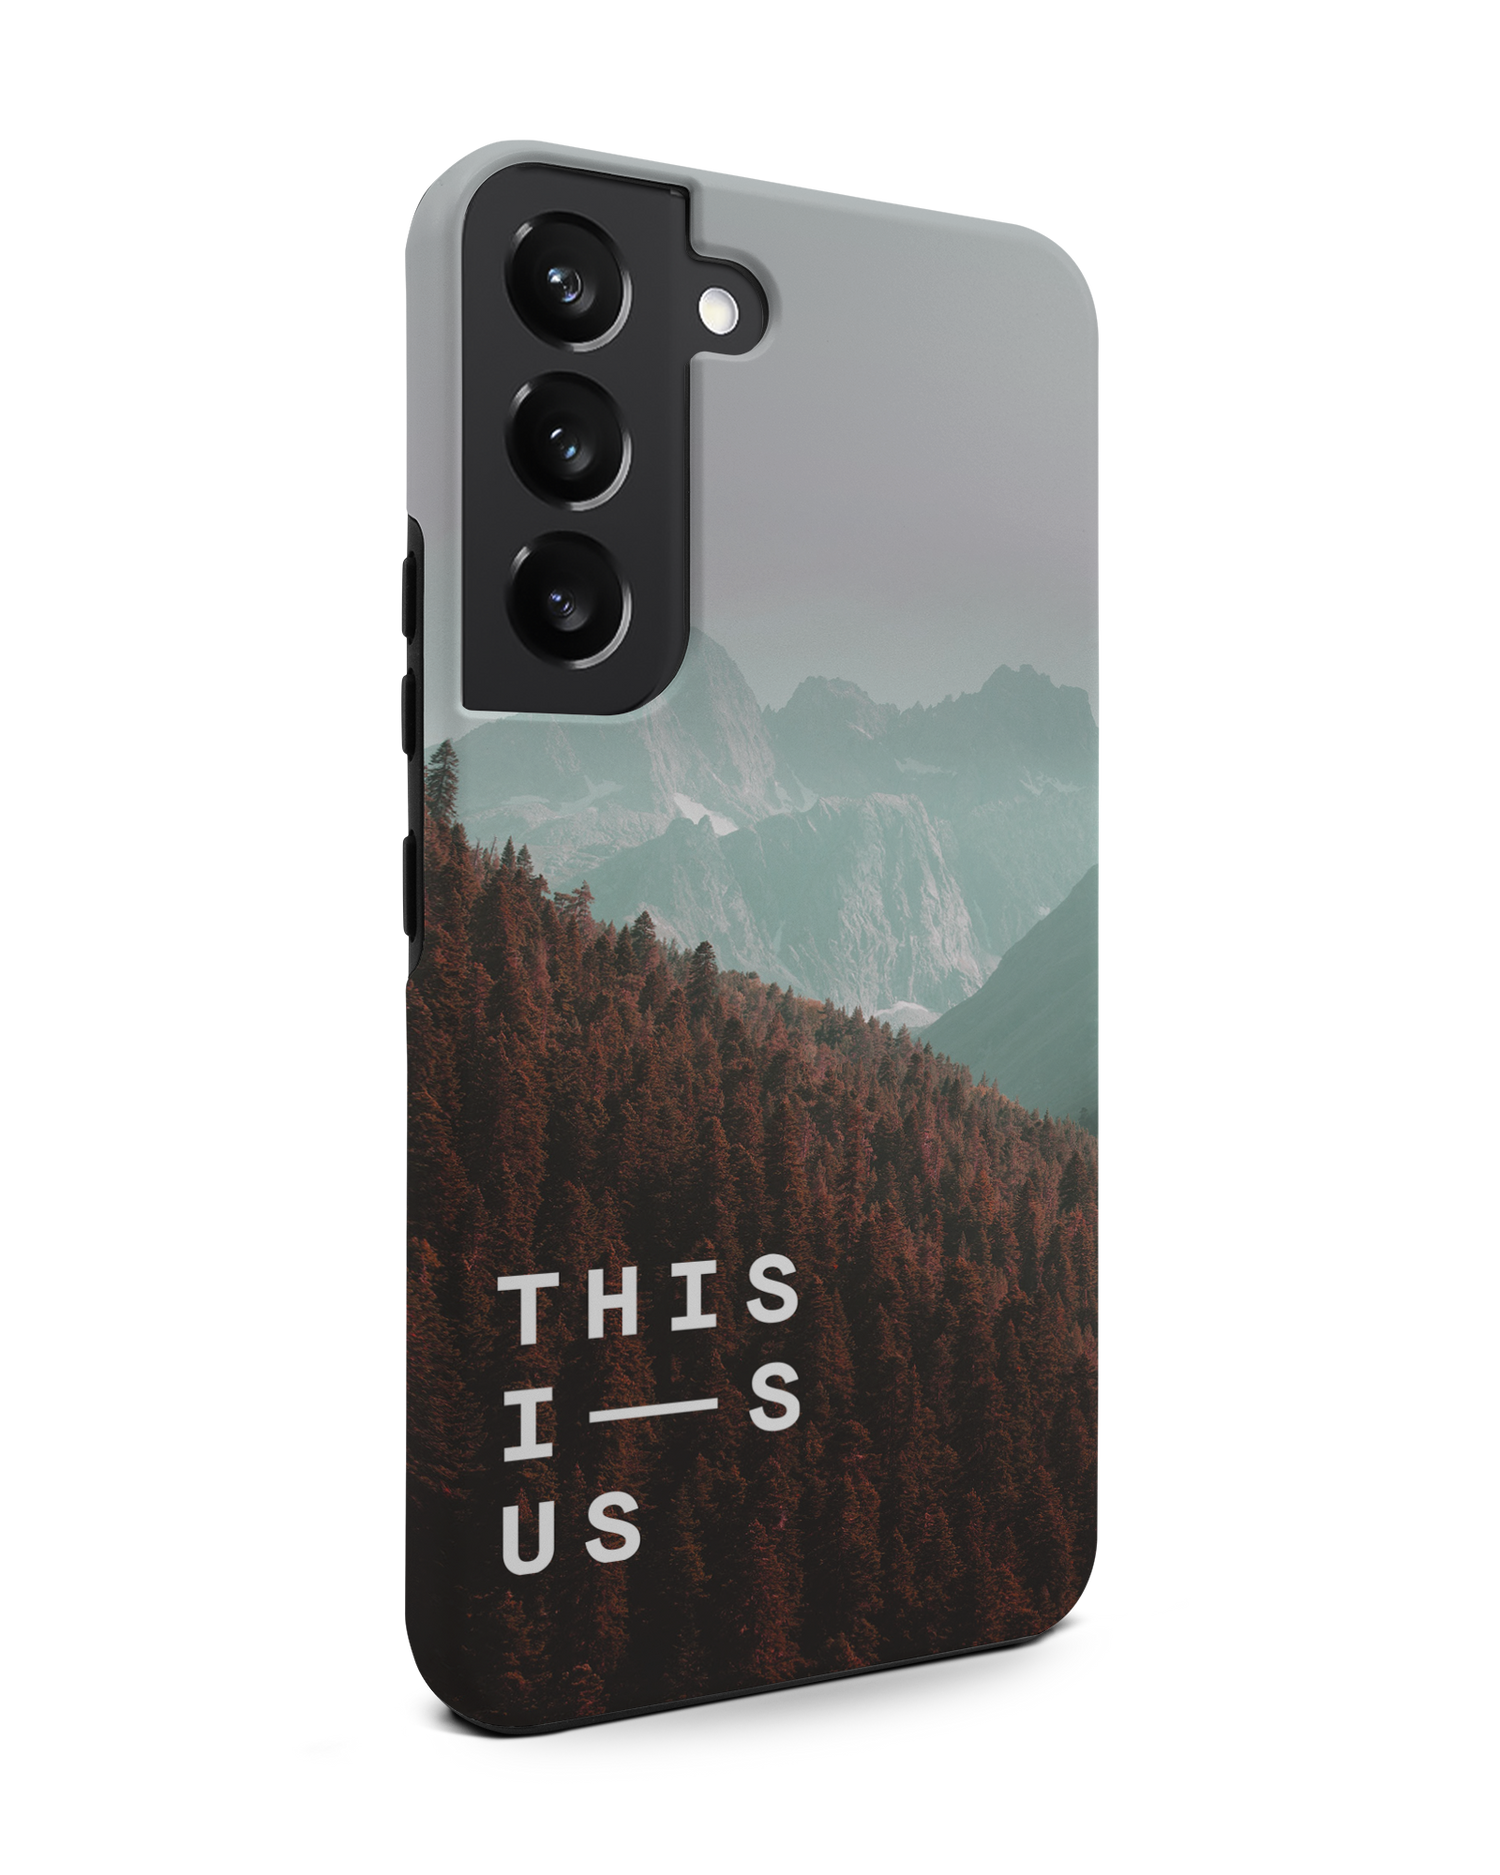 Into the Woods Premium Phone Case Samsung Galaxy S22 5G: View from the left side